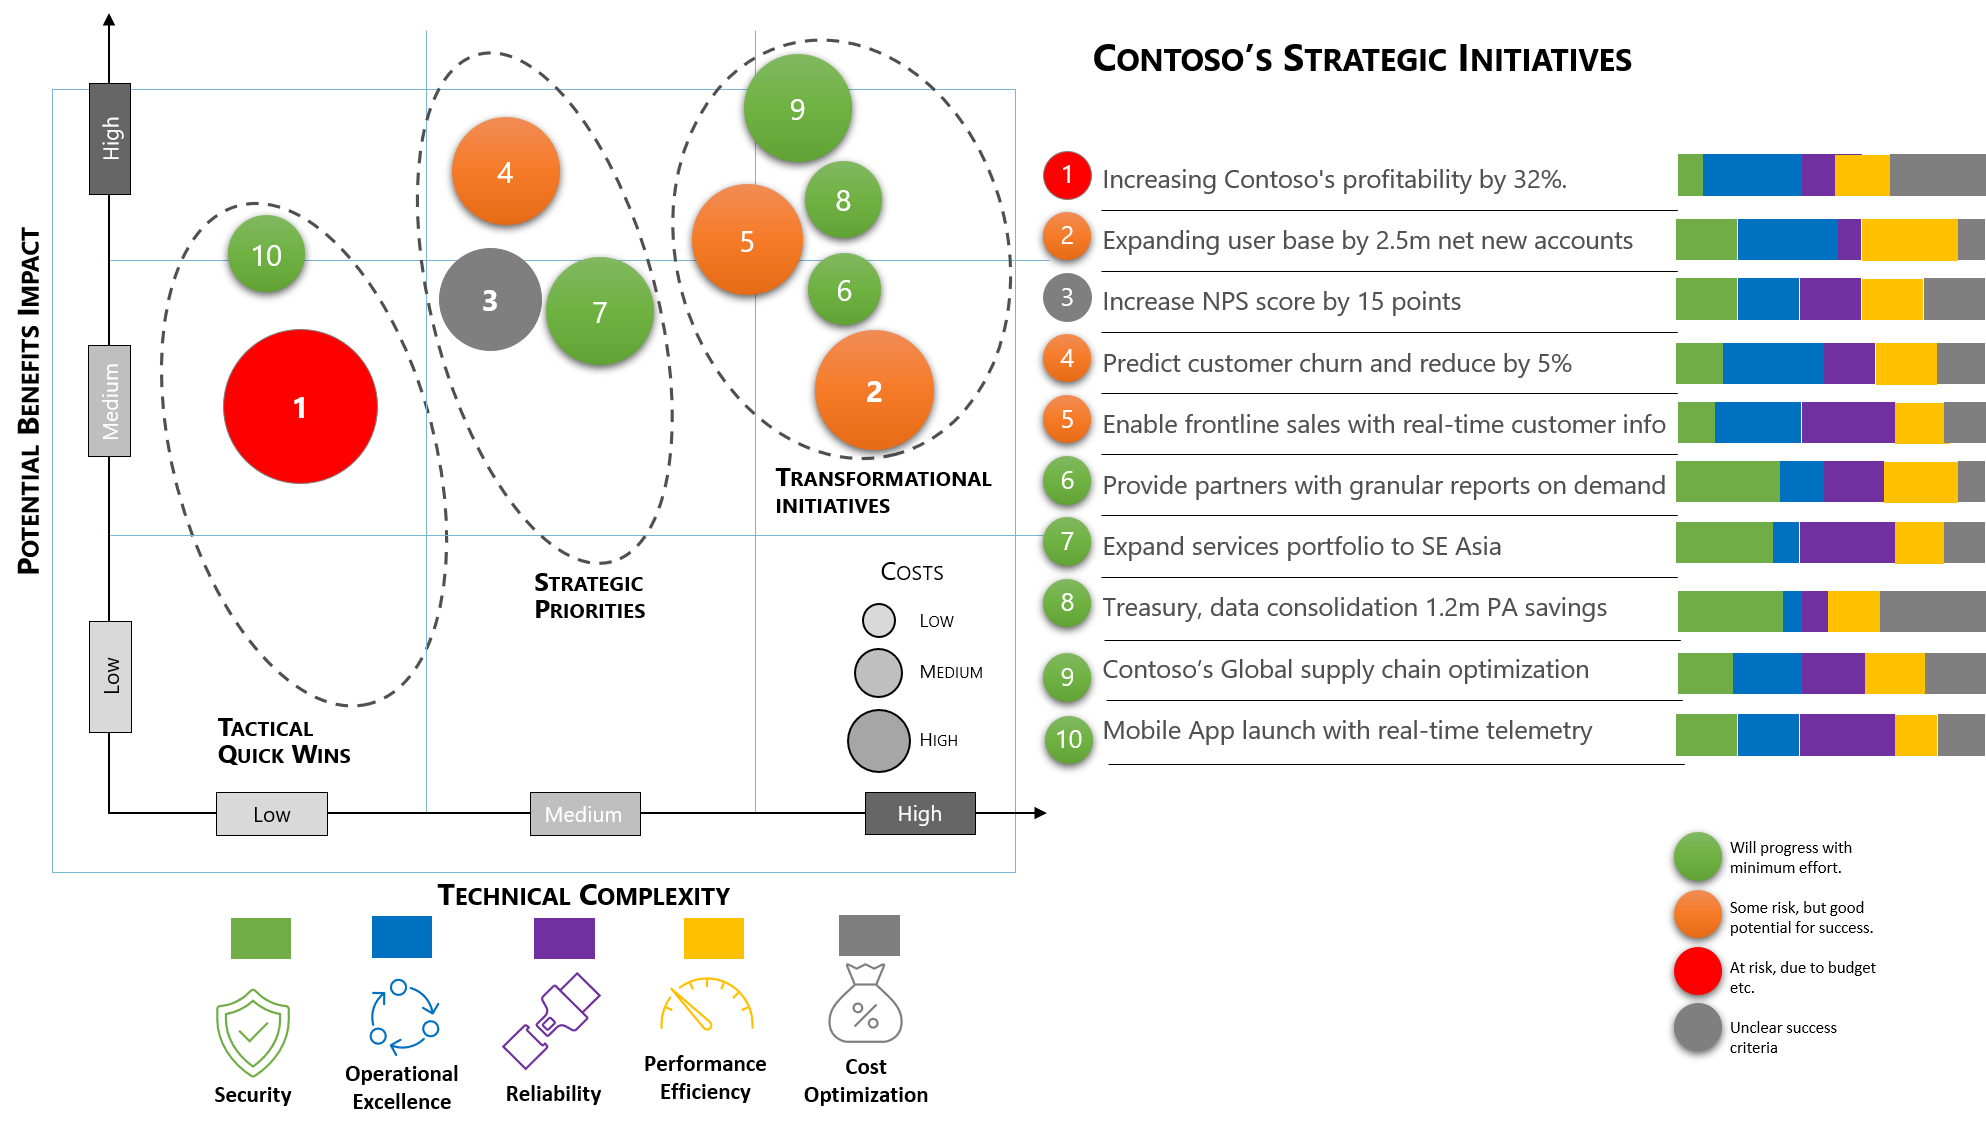 Example diagram showing how to align strategic business priorities with technical complexities for an effective data strategy with a focus on architectural pillars